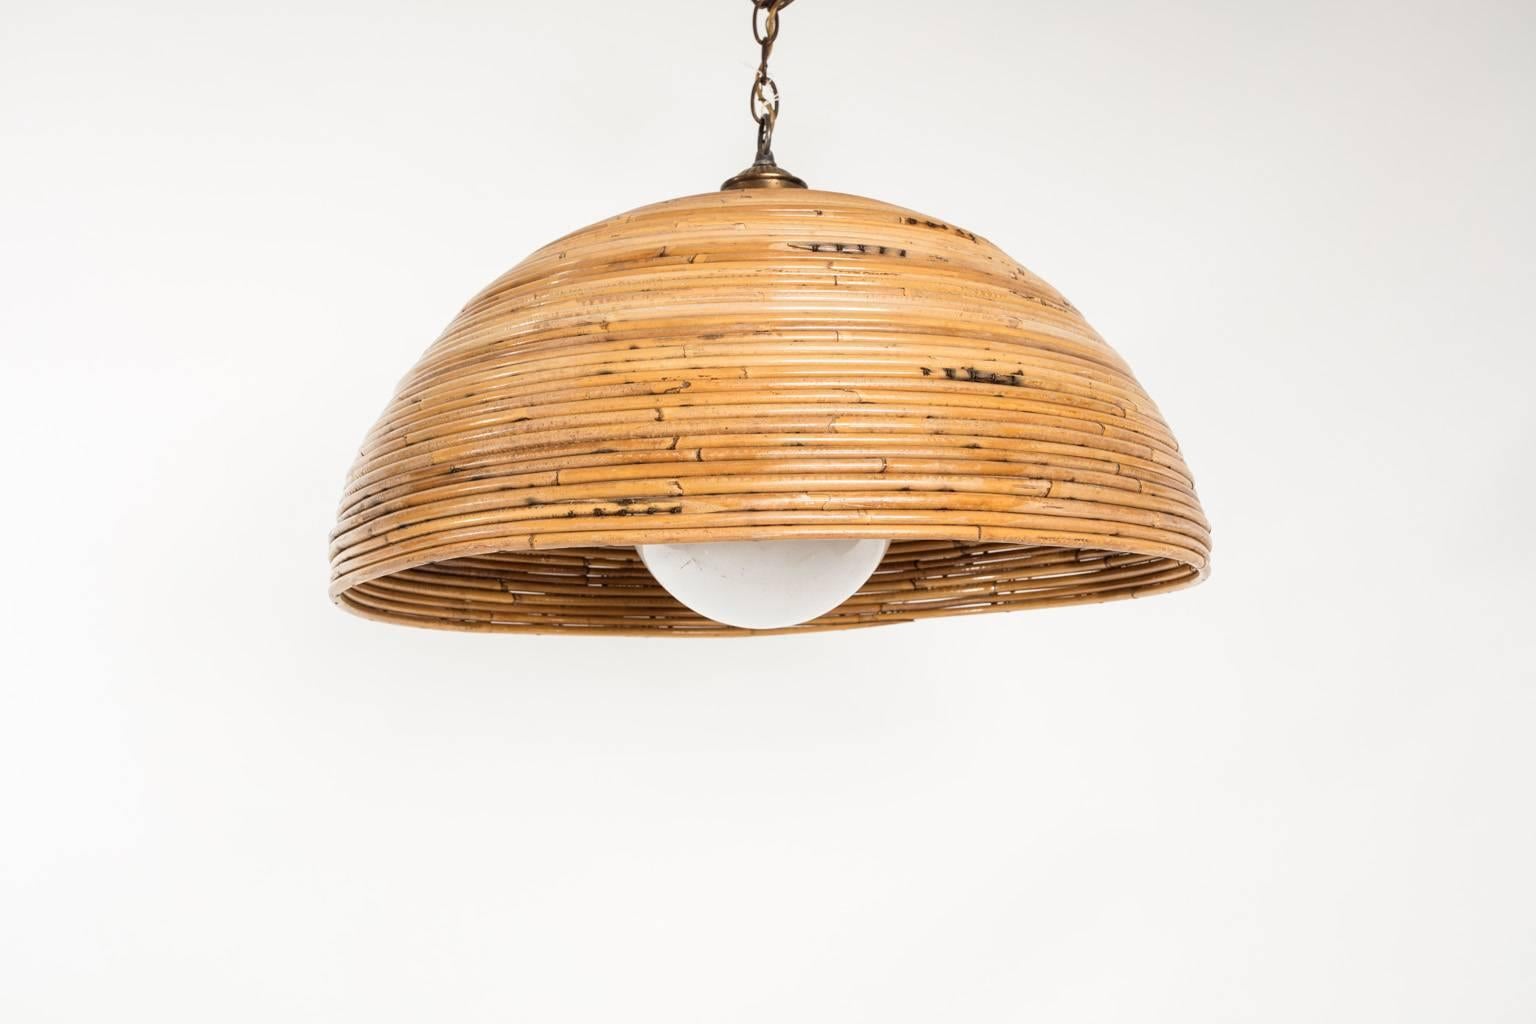 Hanging light fixture covered by a rattan, 